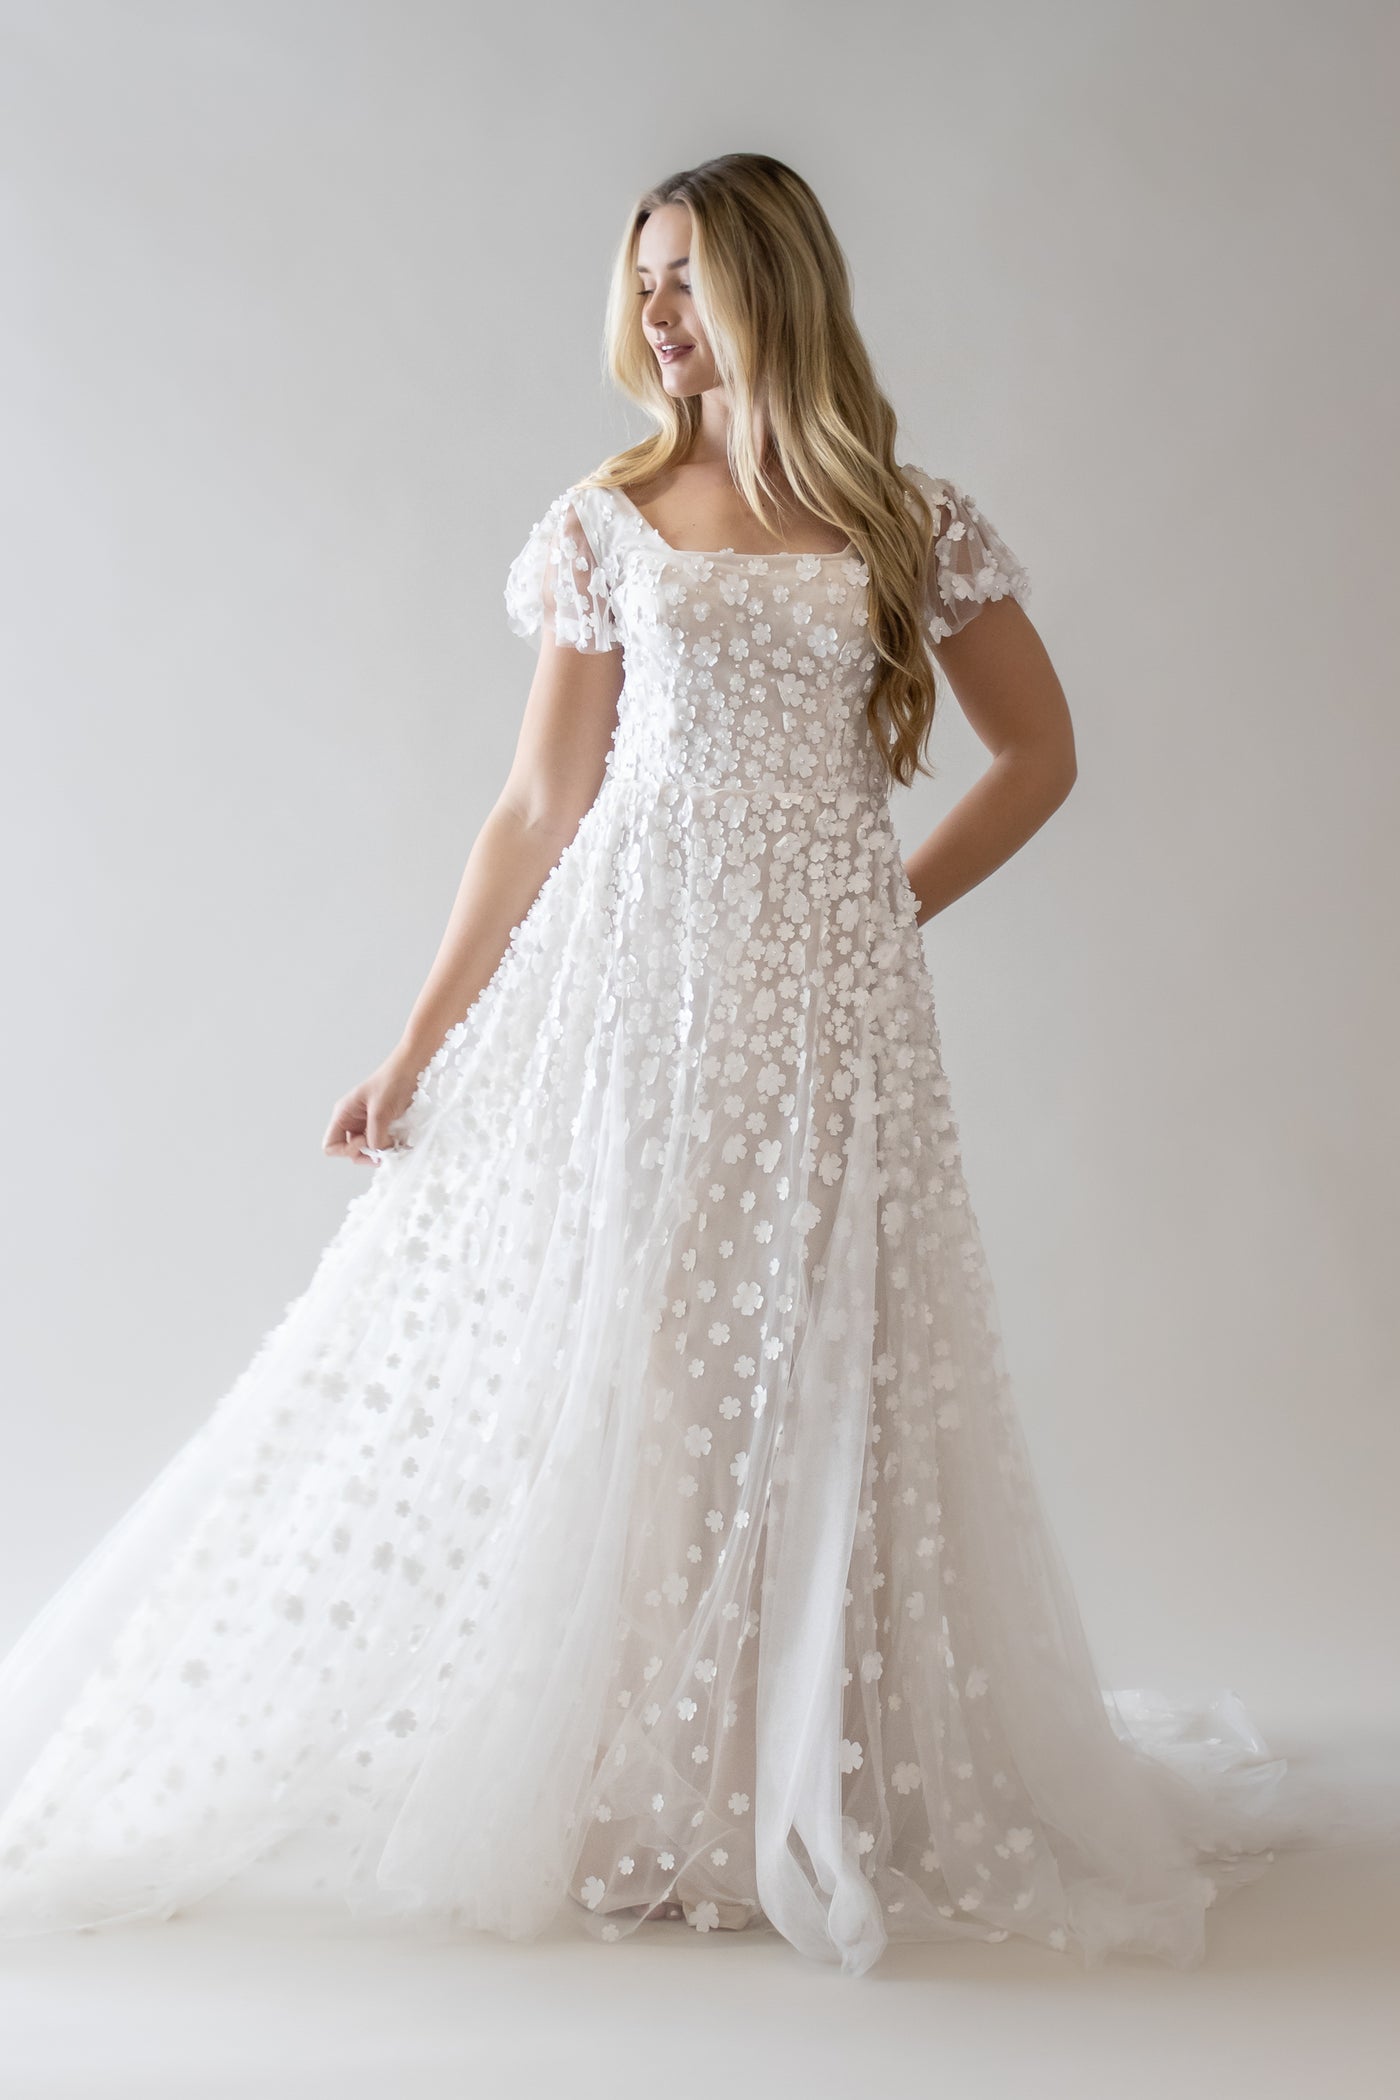 This is a modest wedding dress with an a-line silhouette a 3D floral applique.